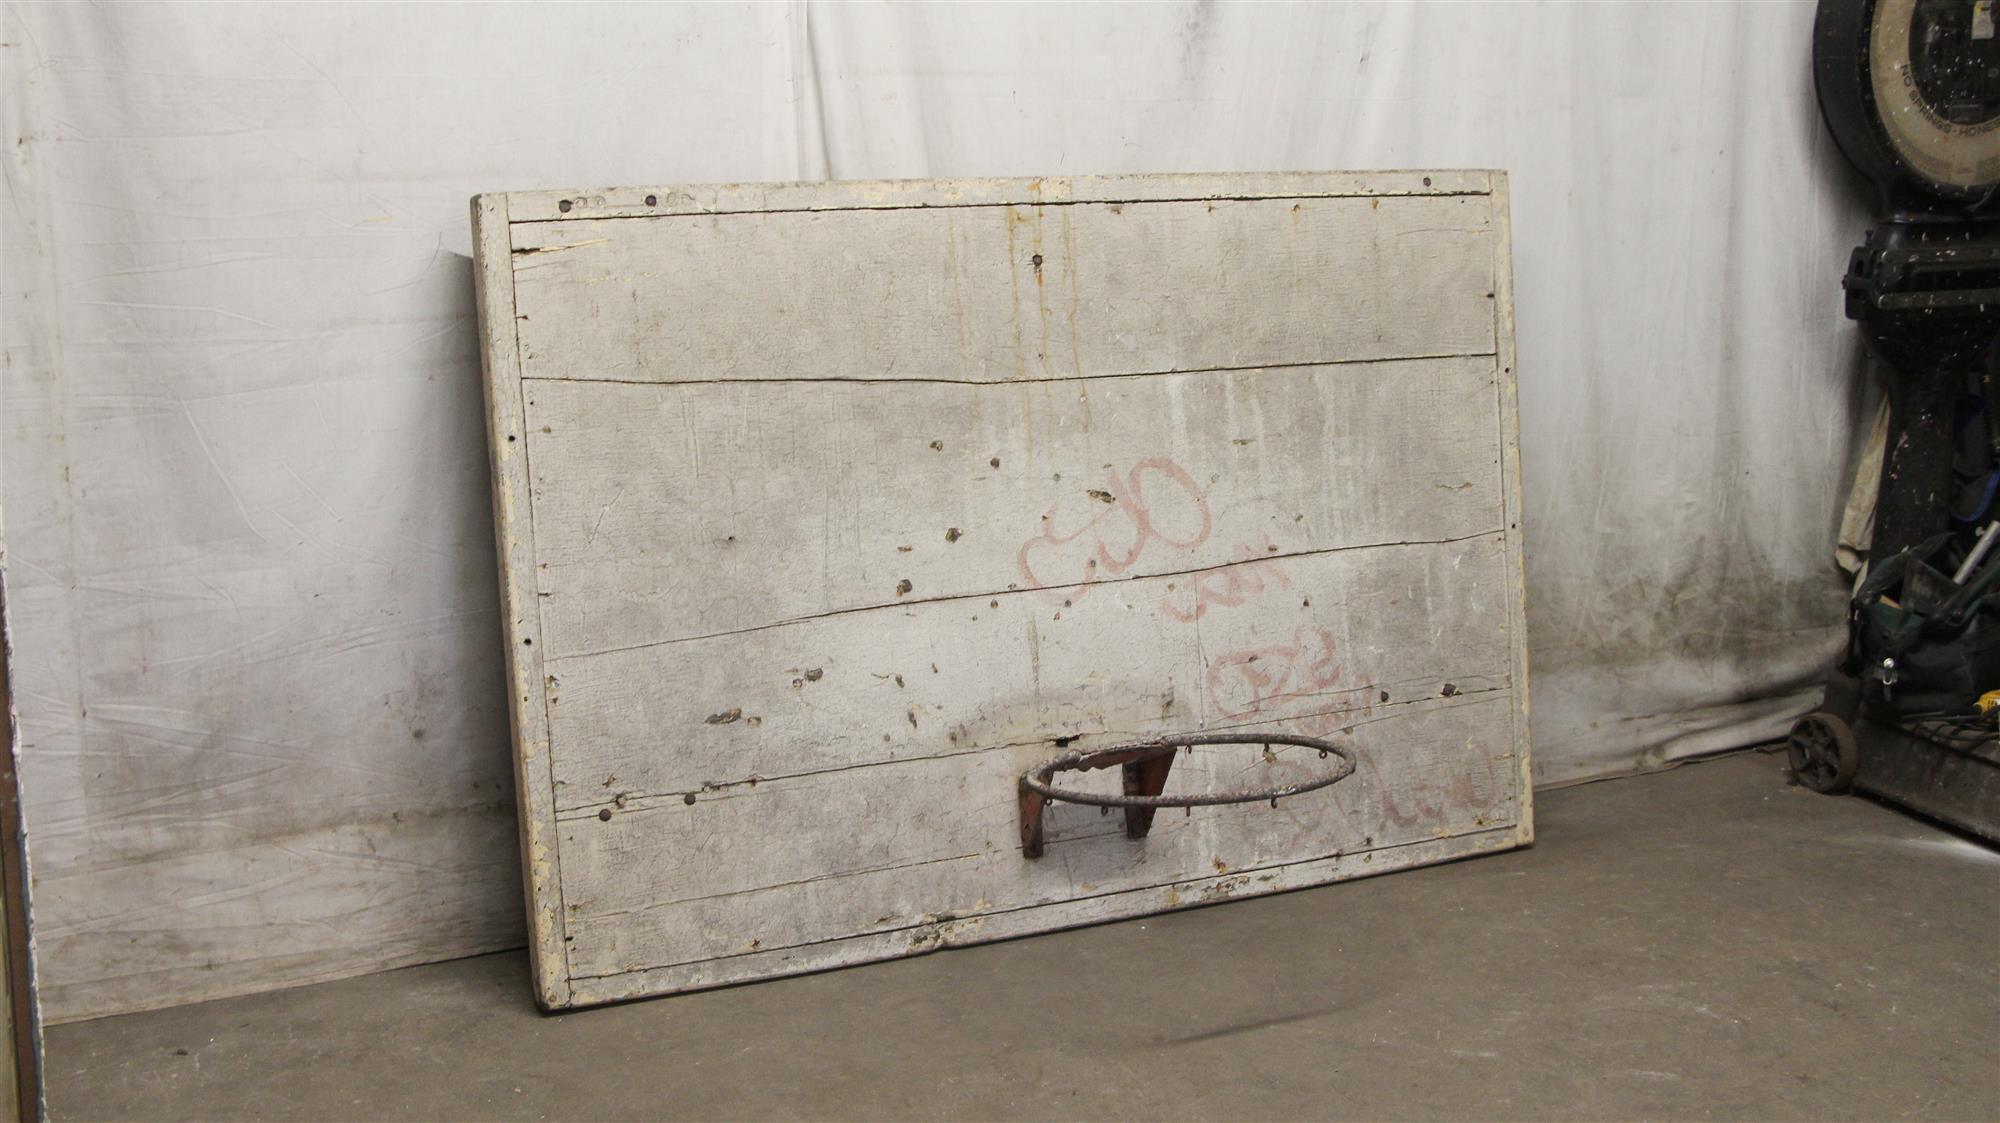 Adjustable wooden distressed basketball backboard from a Manhattan court in NYC. With original paint. This can be seen at our 400 Gilligan St location in Scranton, PA.